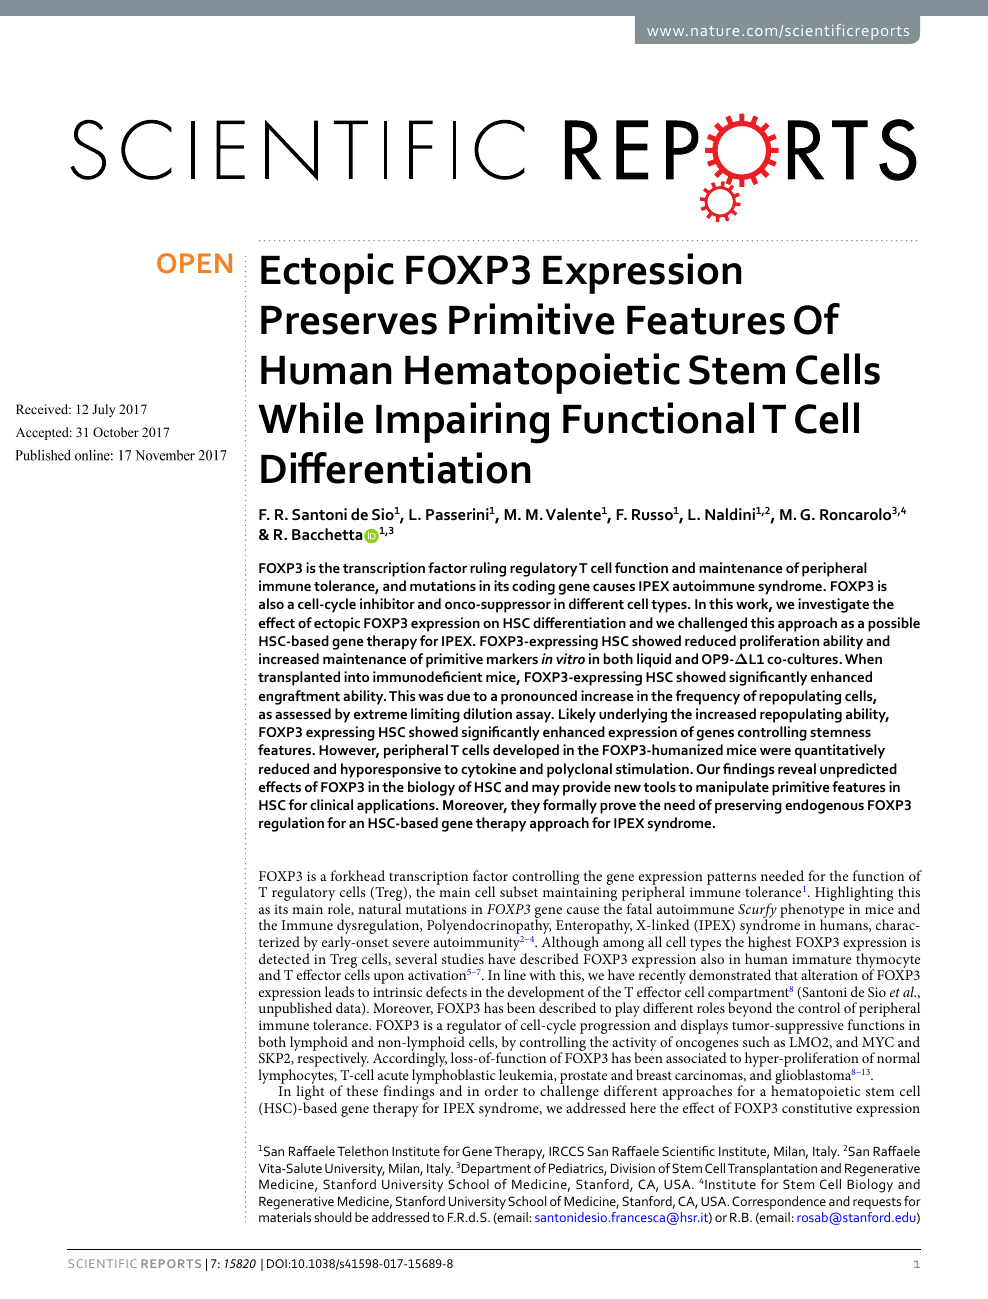 Ectopic Foxp3 Expression Preserves Primitive Features Of Human Hematopoietic Stem Cells While Impairing Functional T Cell Differentiation Topic Of Research Paper In Biological Sciences Download Scholarly Article Pdf And Read For